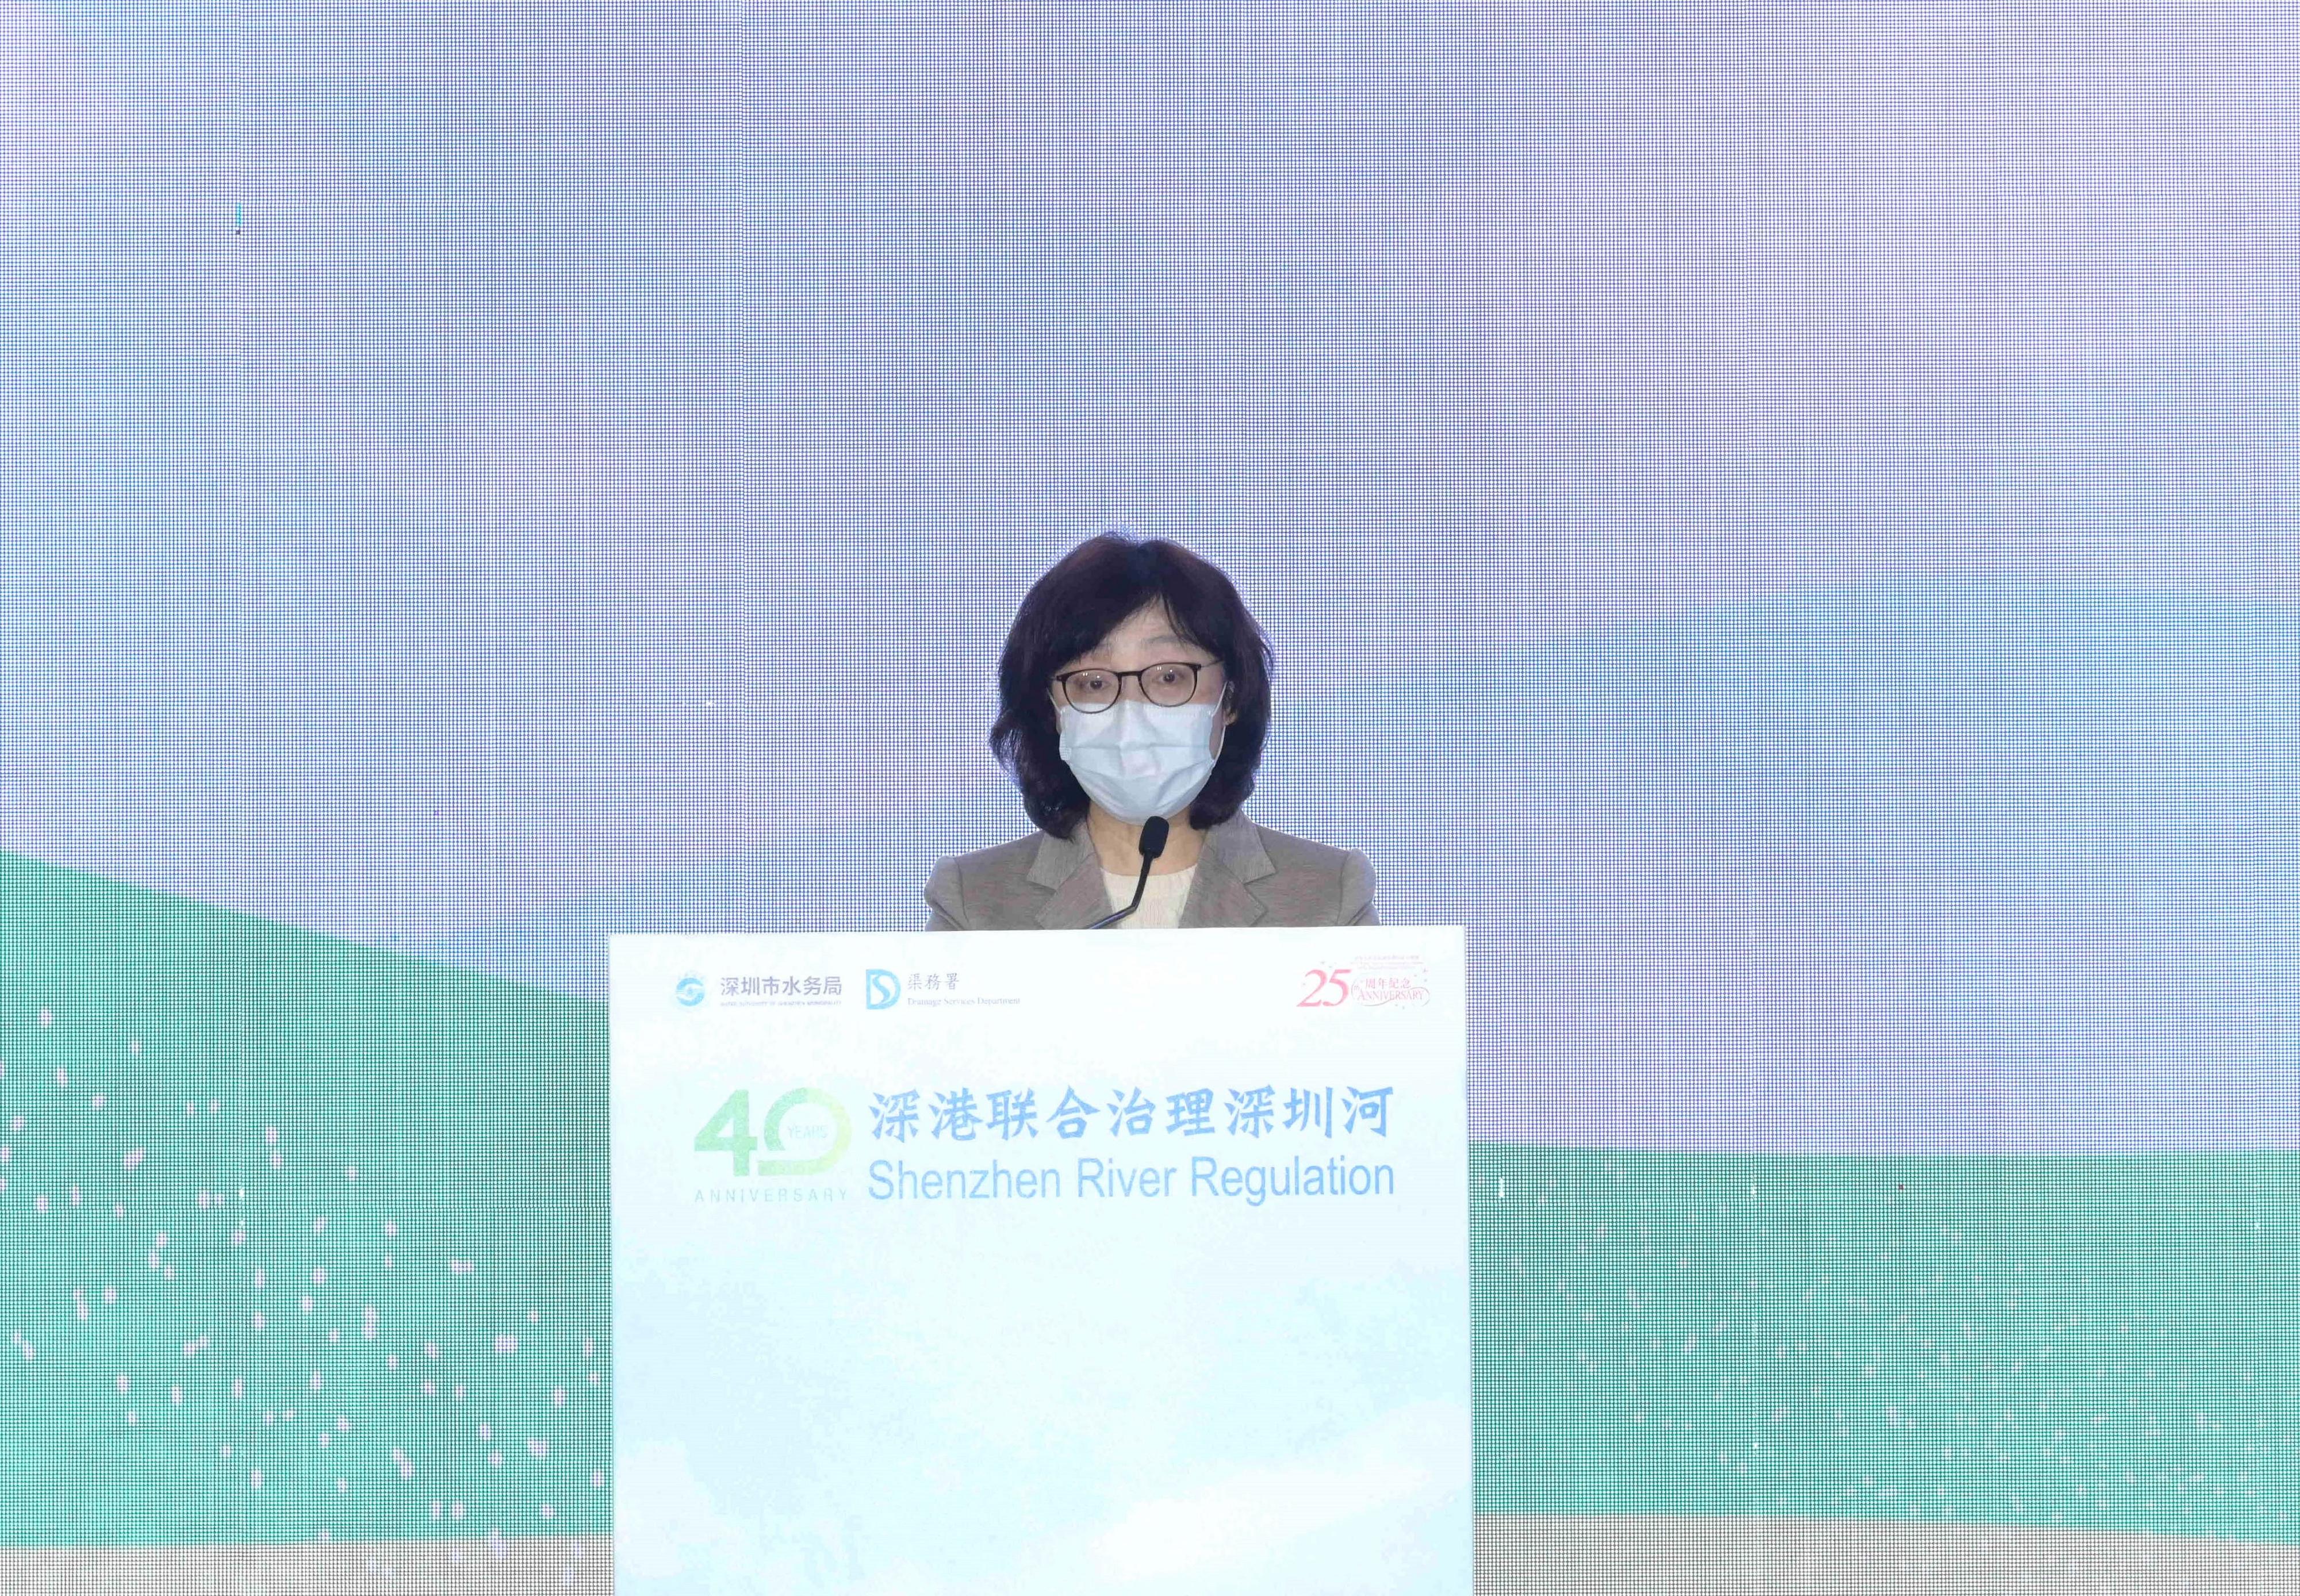 The Hong Kong Special Administrative Region Government today (December 16) jointly held a commemorative ceremony for the 40th anniversary of Shenzhen River Regulation with the Shenzhen Municipal People's Government in Hong Kong and Shenzhen respectively. Photo shows the Secretary for Development, Ms Bernadette Linn, speaking at the ceremony.